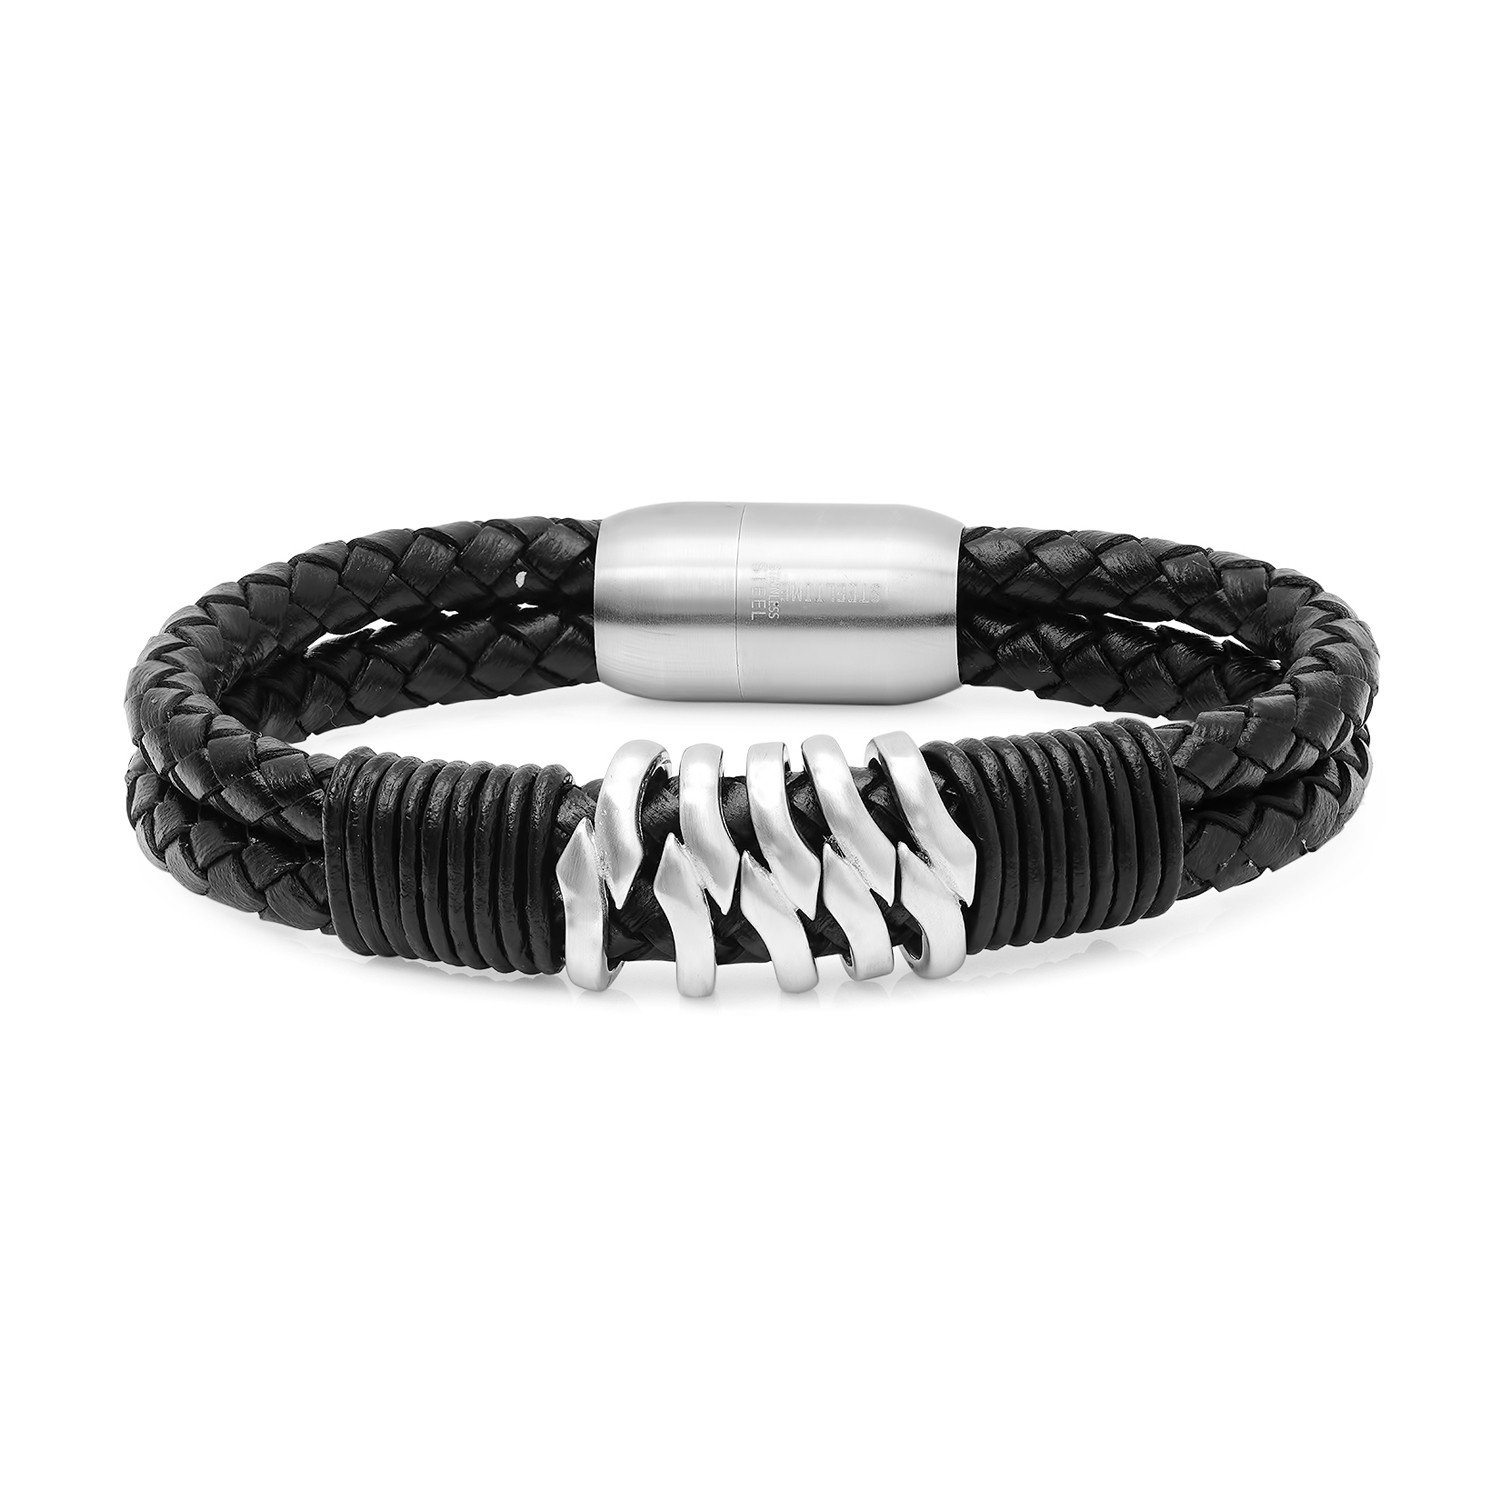 Black Braided Leather Bracelet with Stainless Steel Line Accents ...